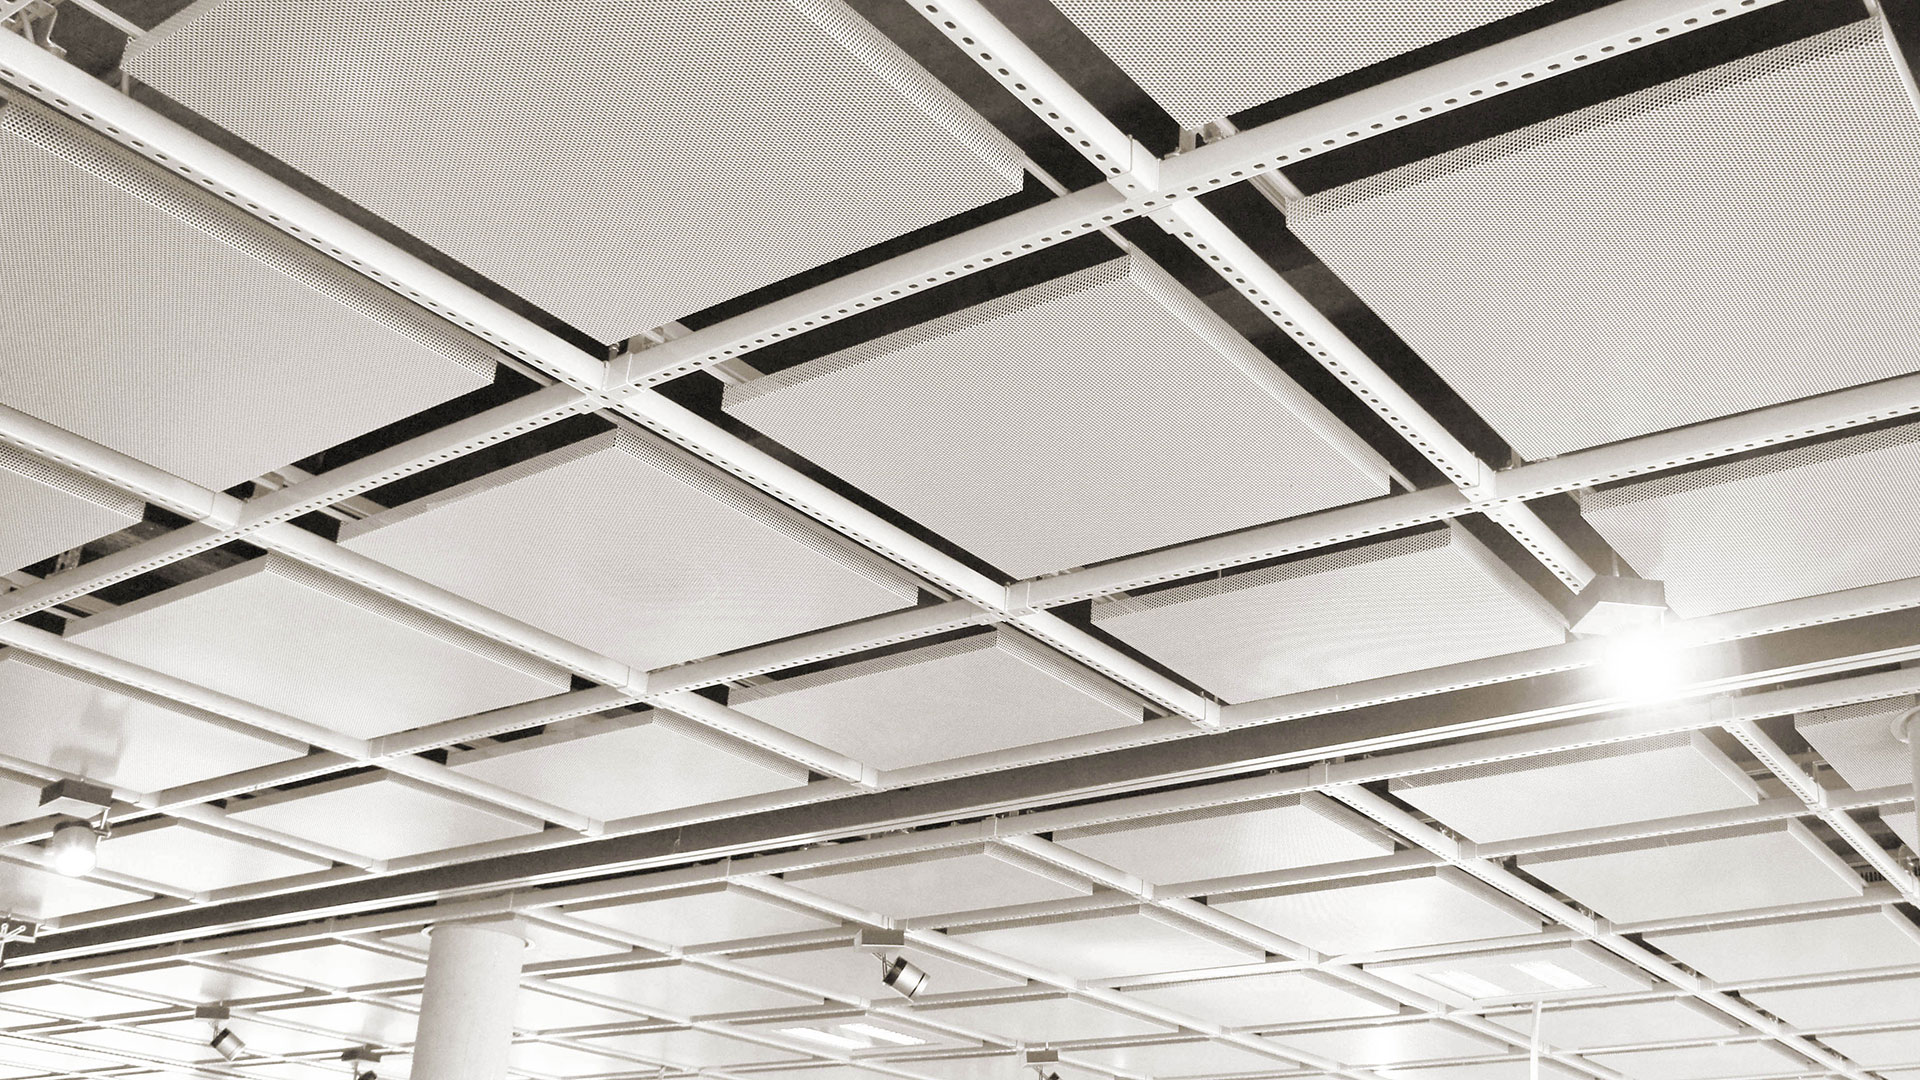 Ceilings & Specialty Acoustical Products